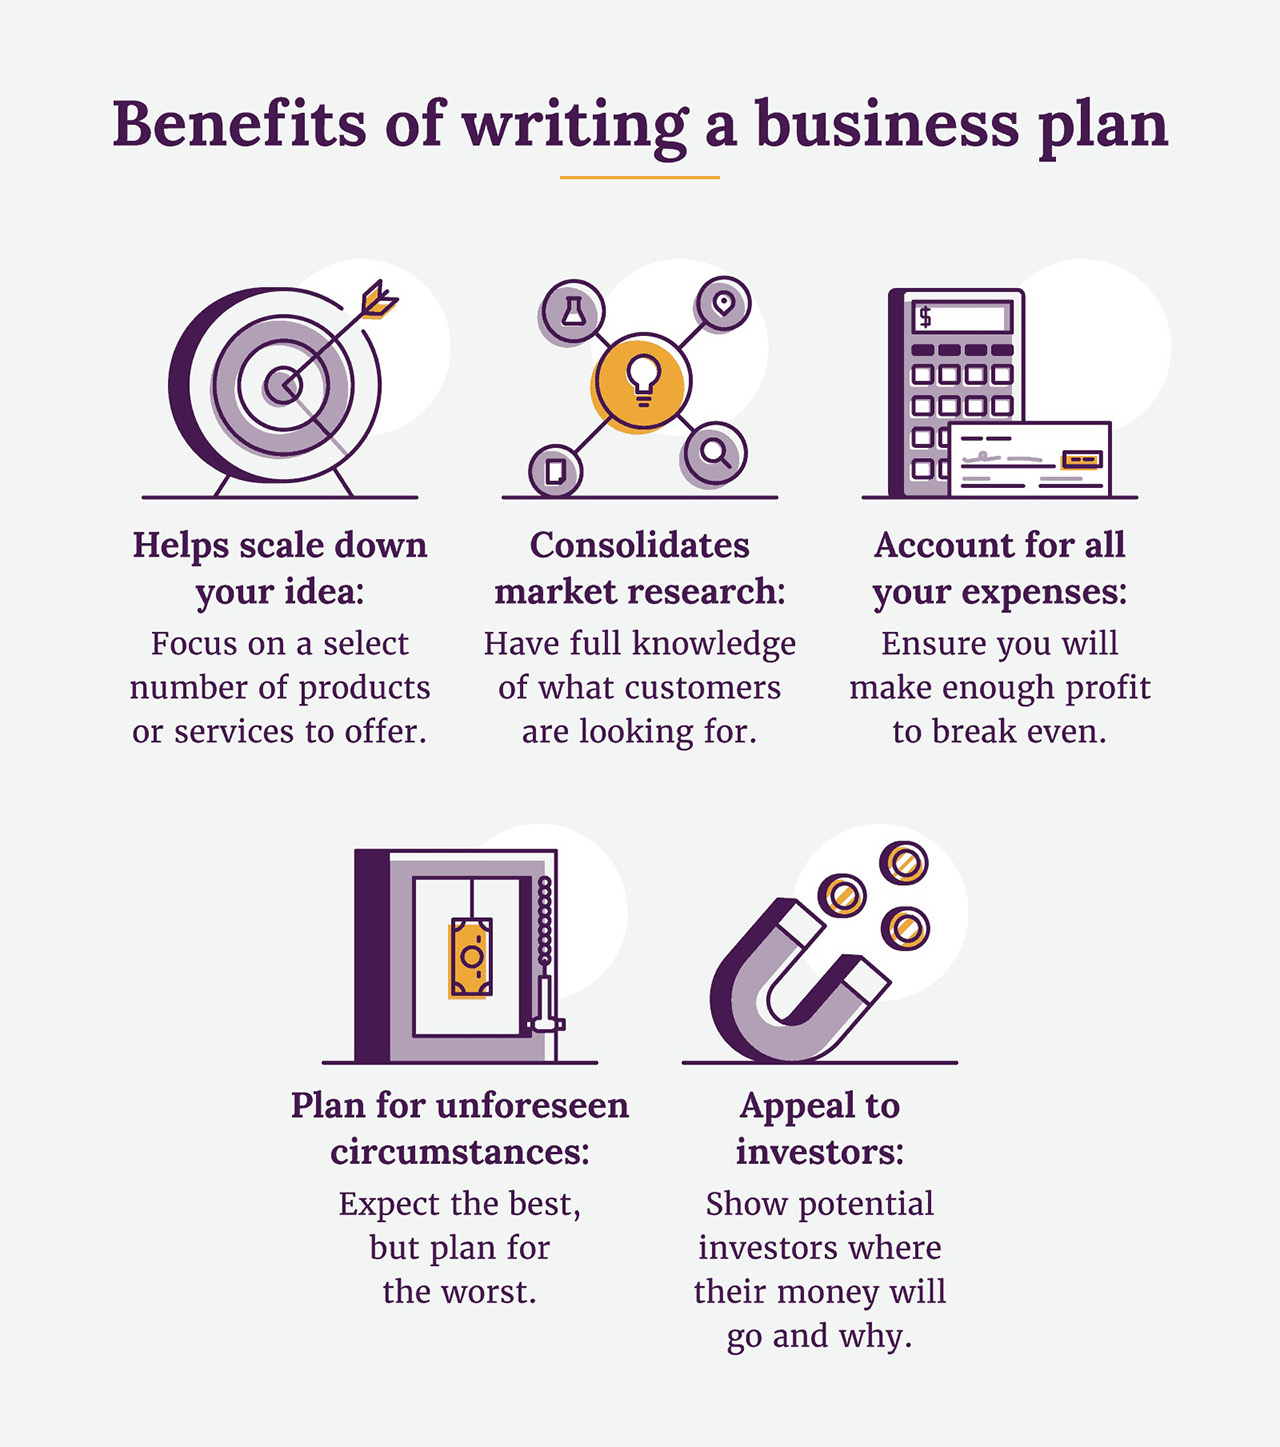 primary reasons for writing a business plan